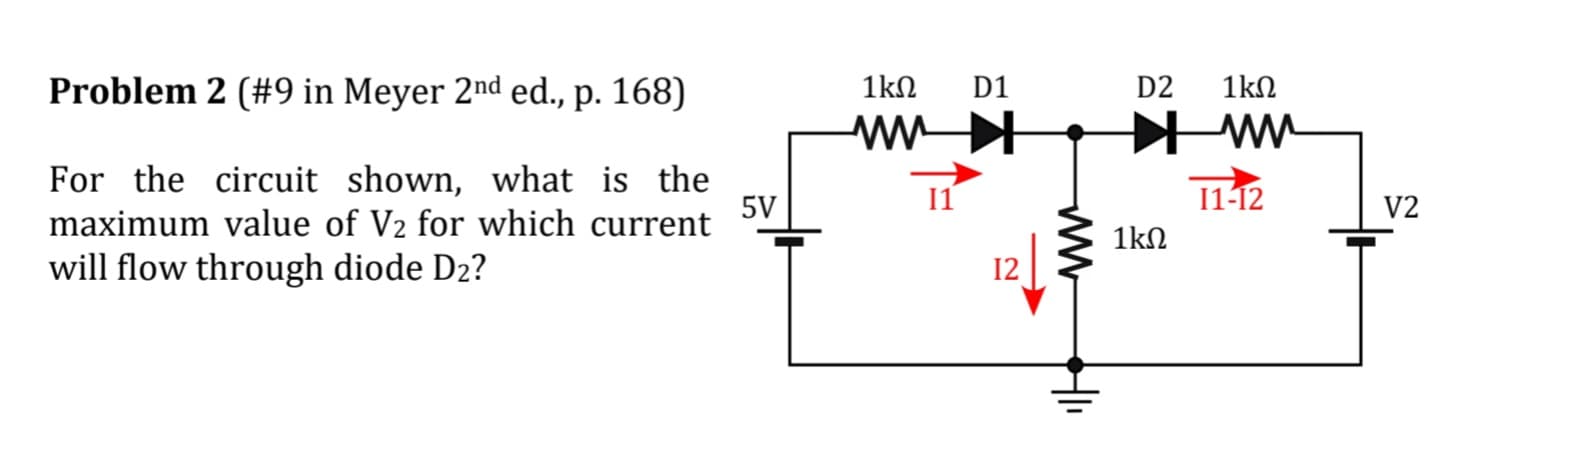 Problem 2 (#9 in Meyer 2nd ed., p. 168)
For the circuit shown, what is the
maximum value of V₂ for which current
will flow through diode D₂?
5V
1kΩ
ww
D1
12
ww
HI₁
D2
1kΩ
1kΩ
ww
11-12
V2